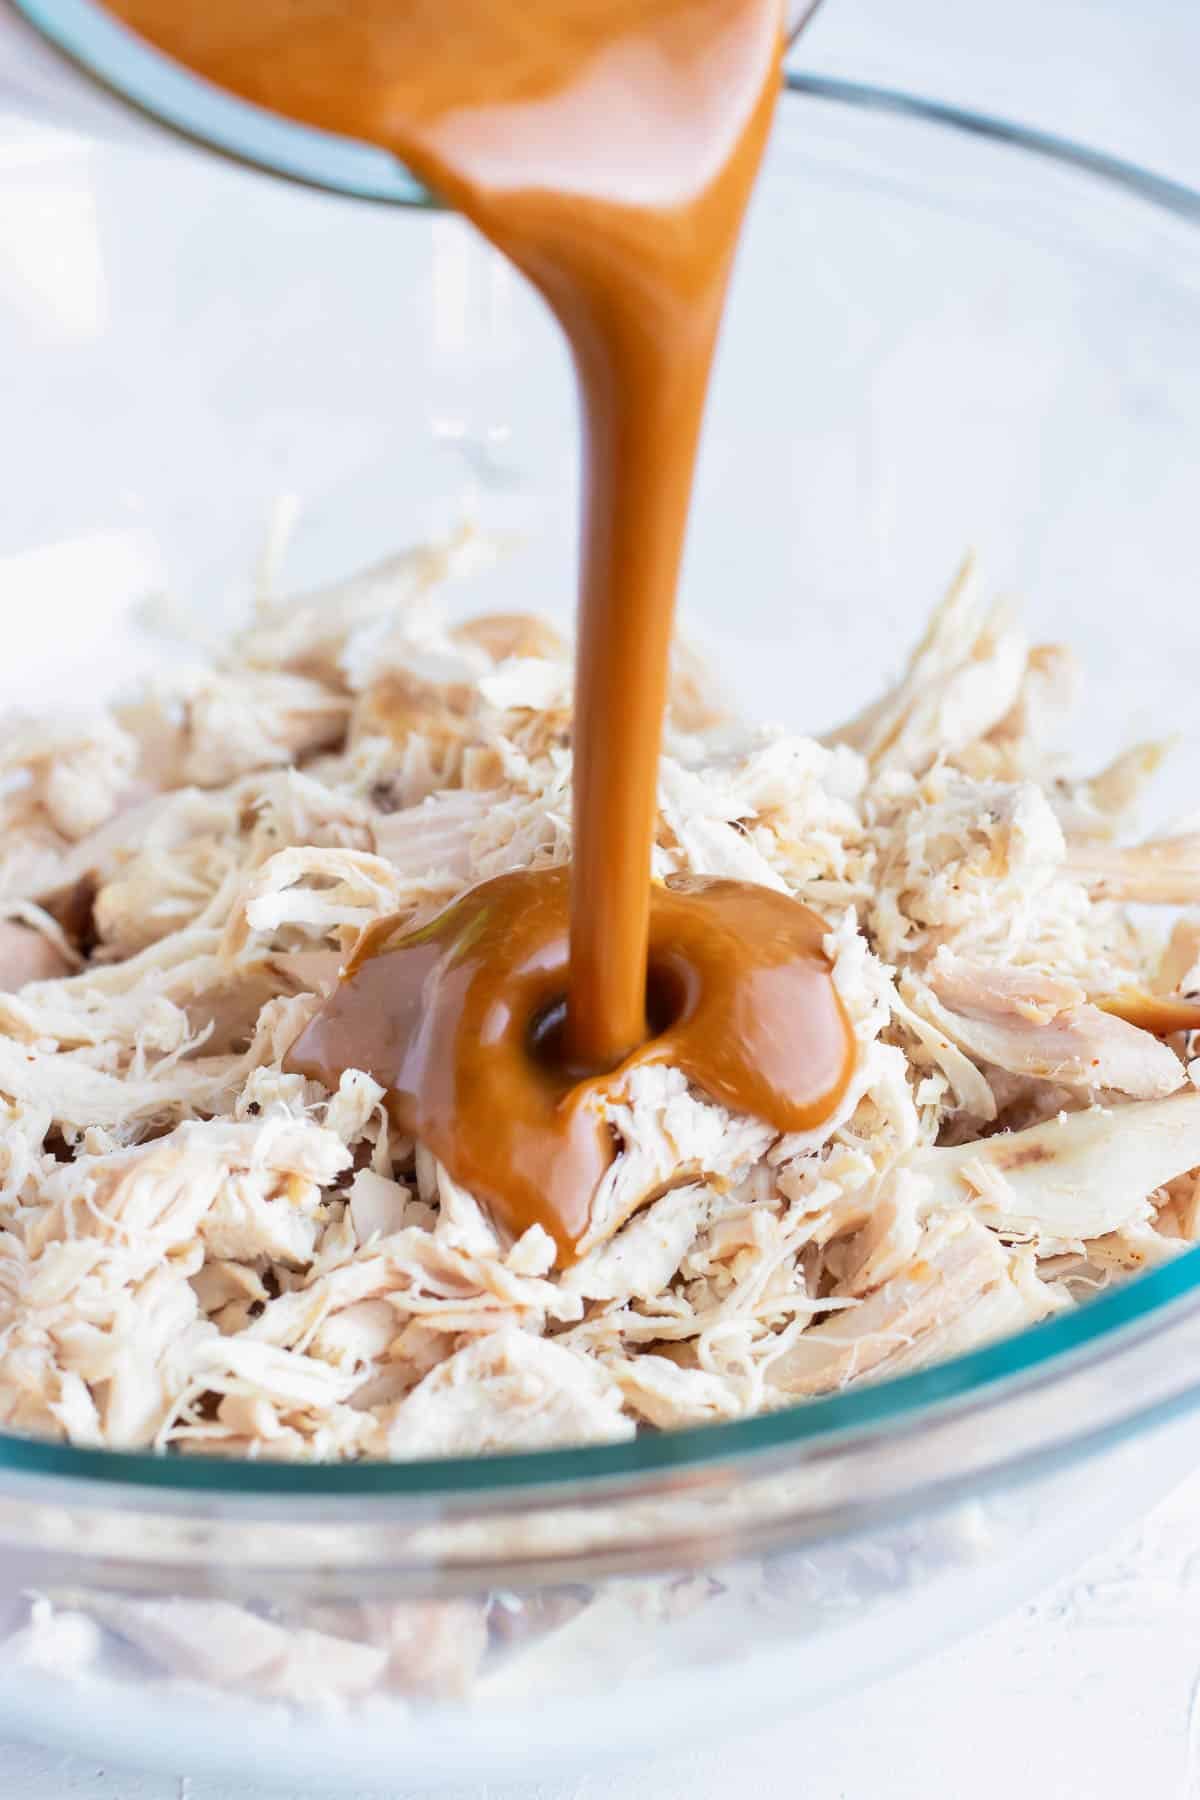 Asian peanut butter sauce being poured into a clear bowl full of shredded rotisserie chicken.